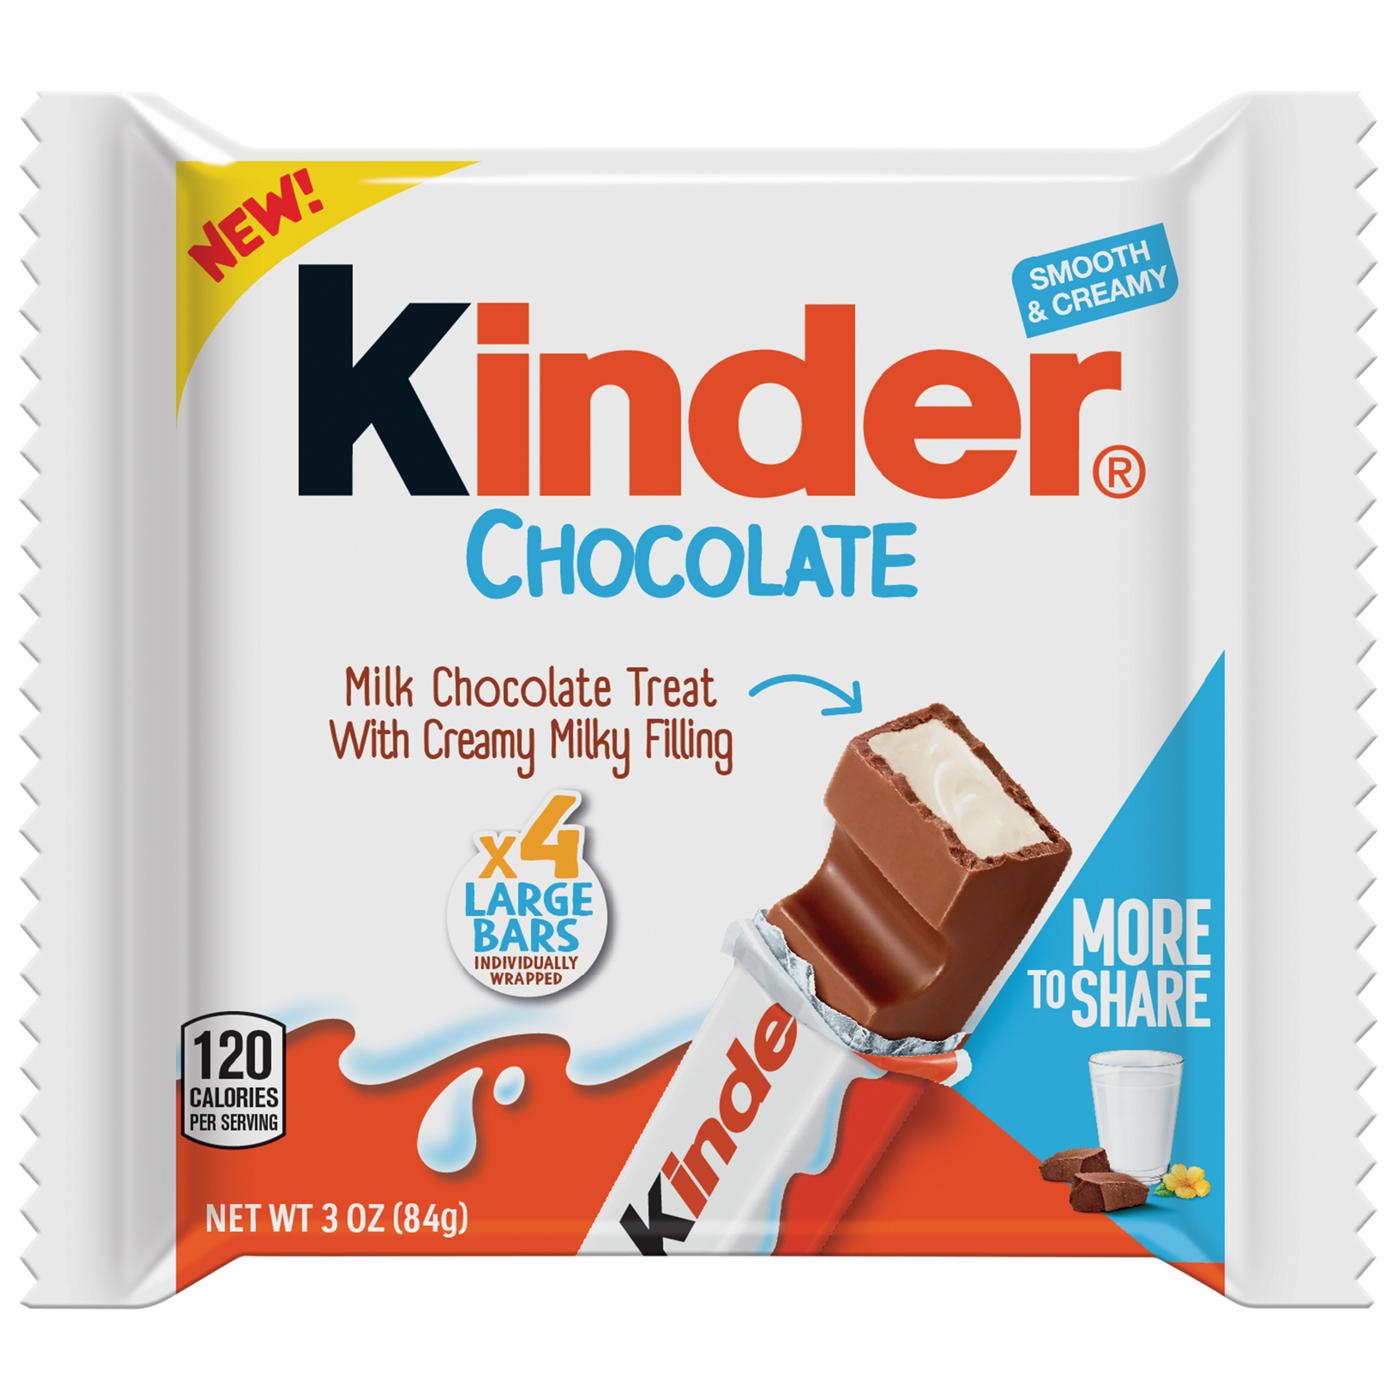 Kinder Chocolate with Creamy Milky Filling Candy Bars - King Size; image 1 of 5